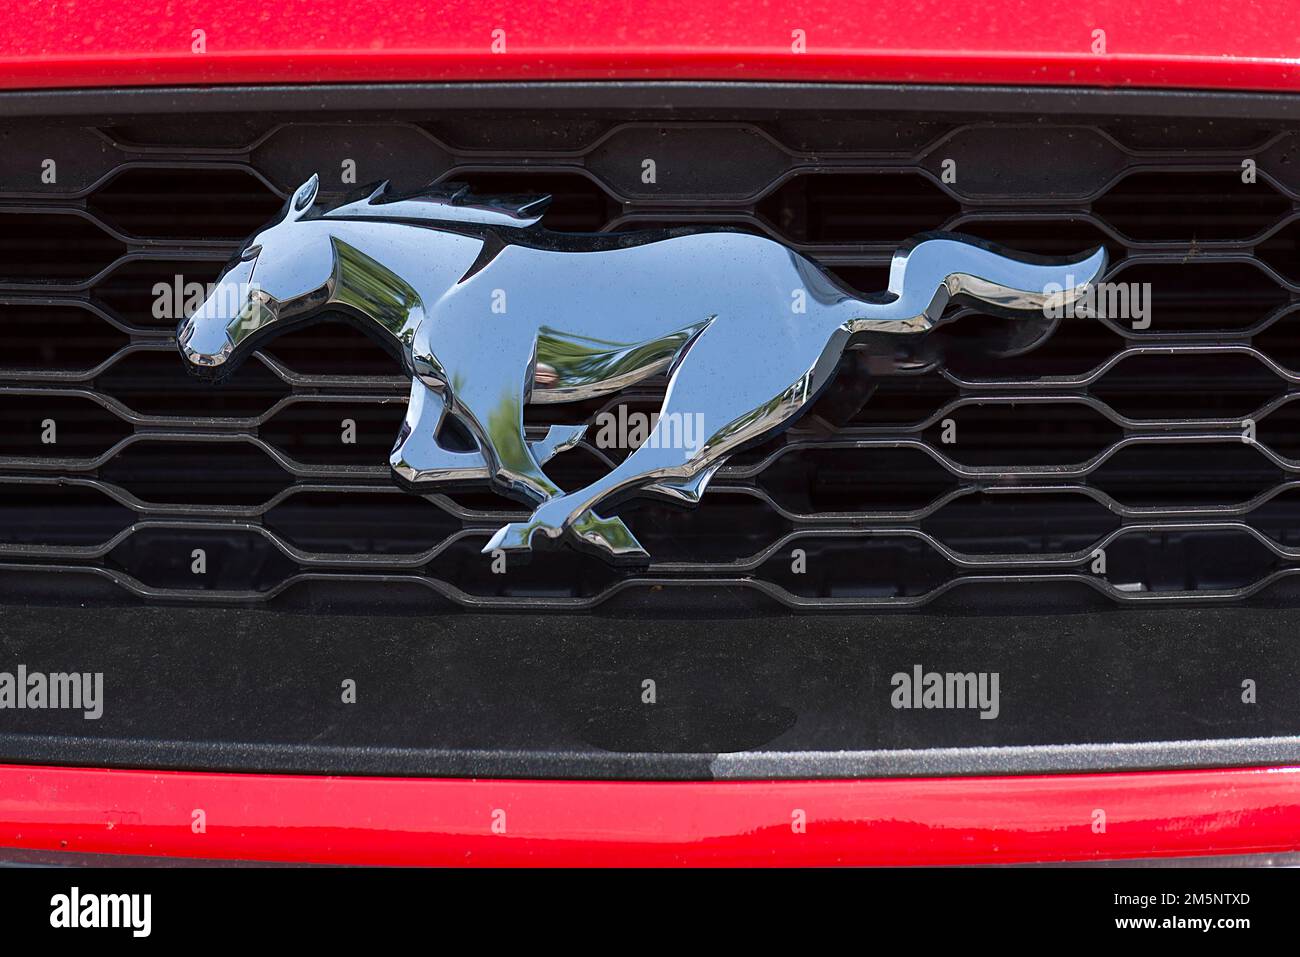 https://c8.alamy.com/comp/2M5NTXD/logo-of-ford-mustang-car-manufacturer-ford-usa-bavaria-germany-2M5NTXD.jpg